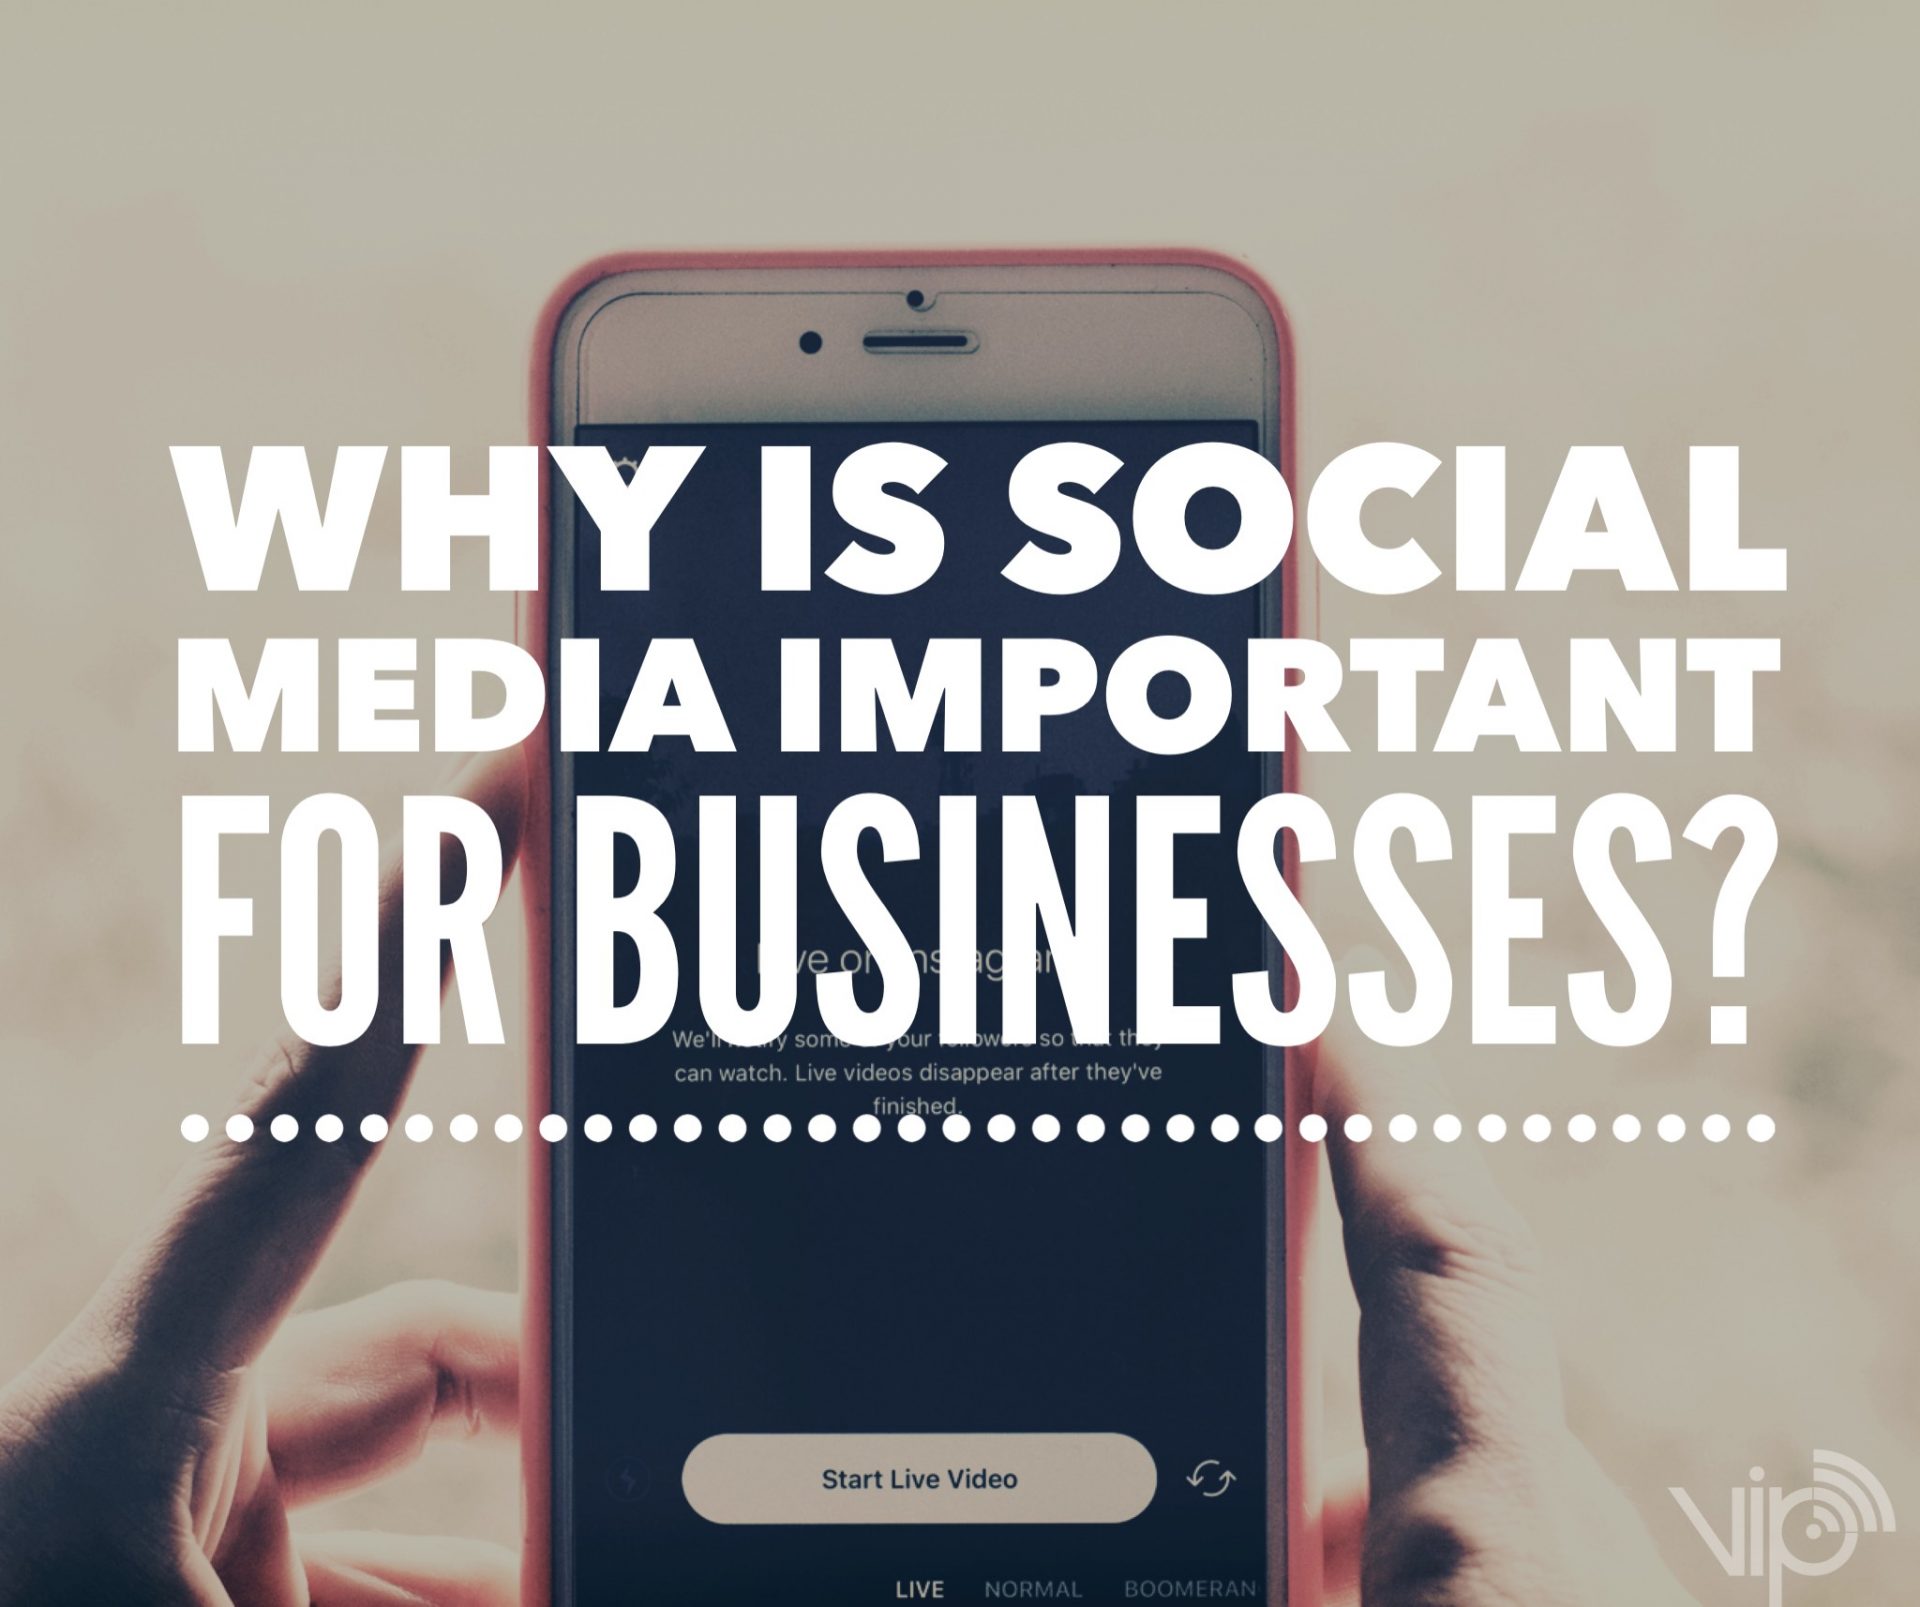 Why is social media important for businesses? 